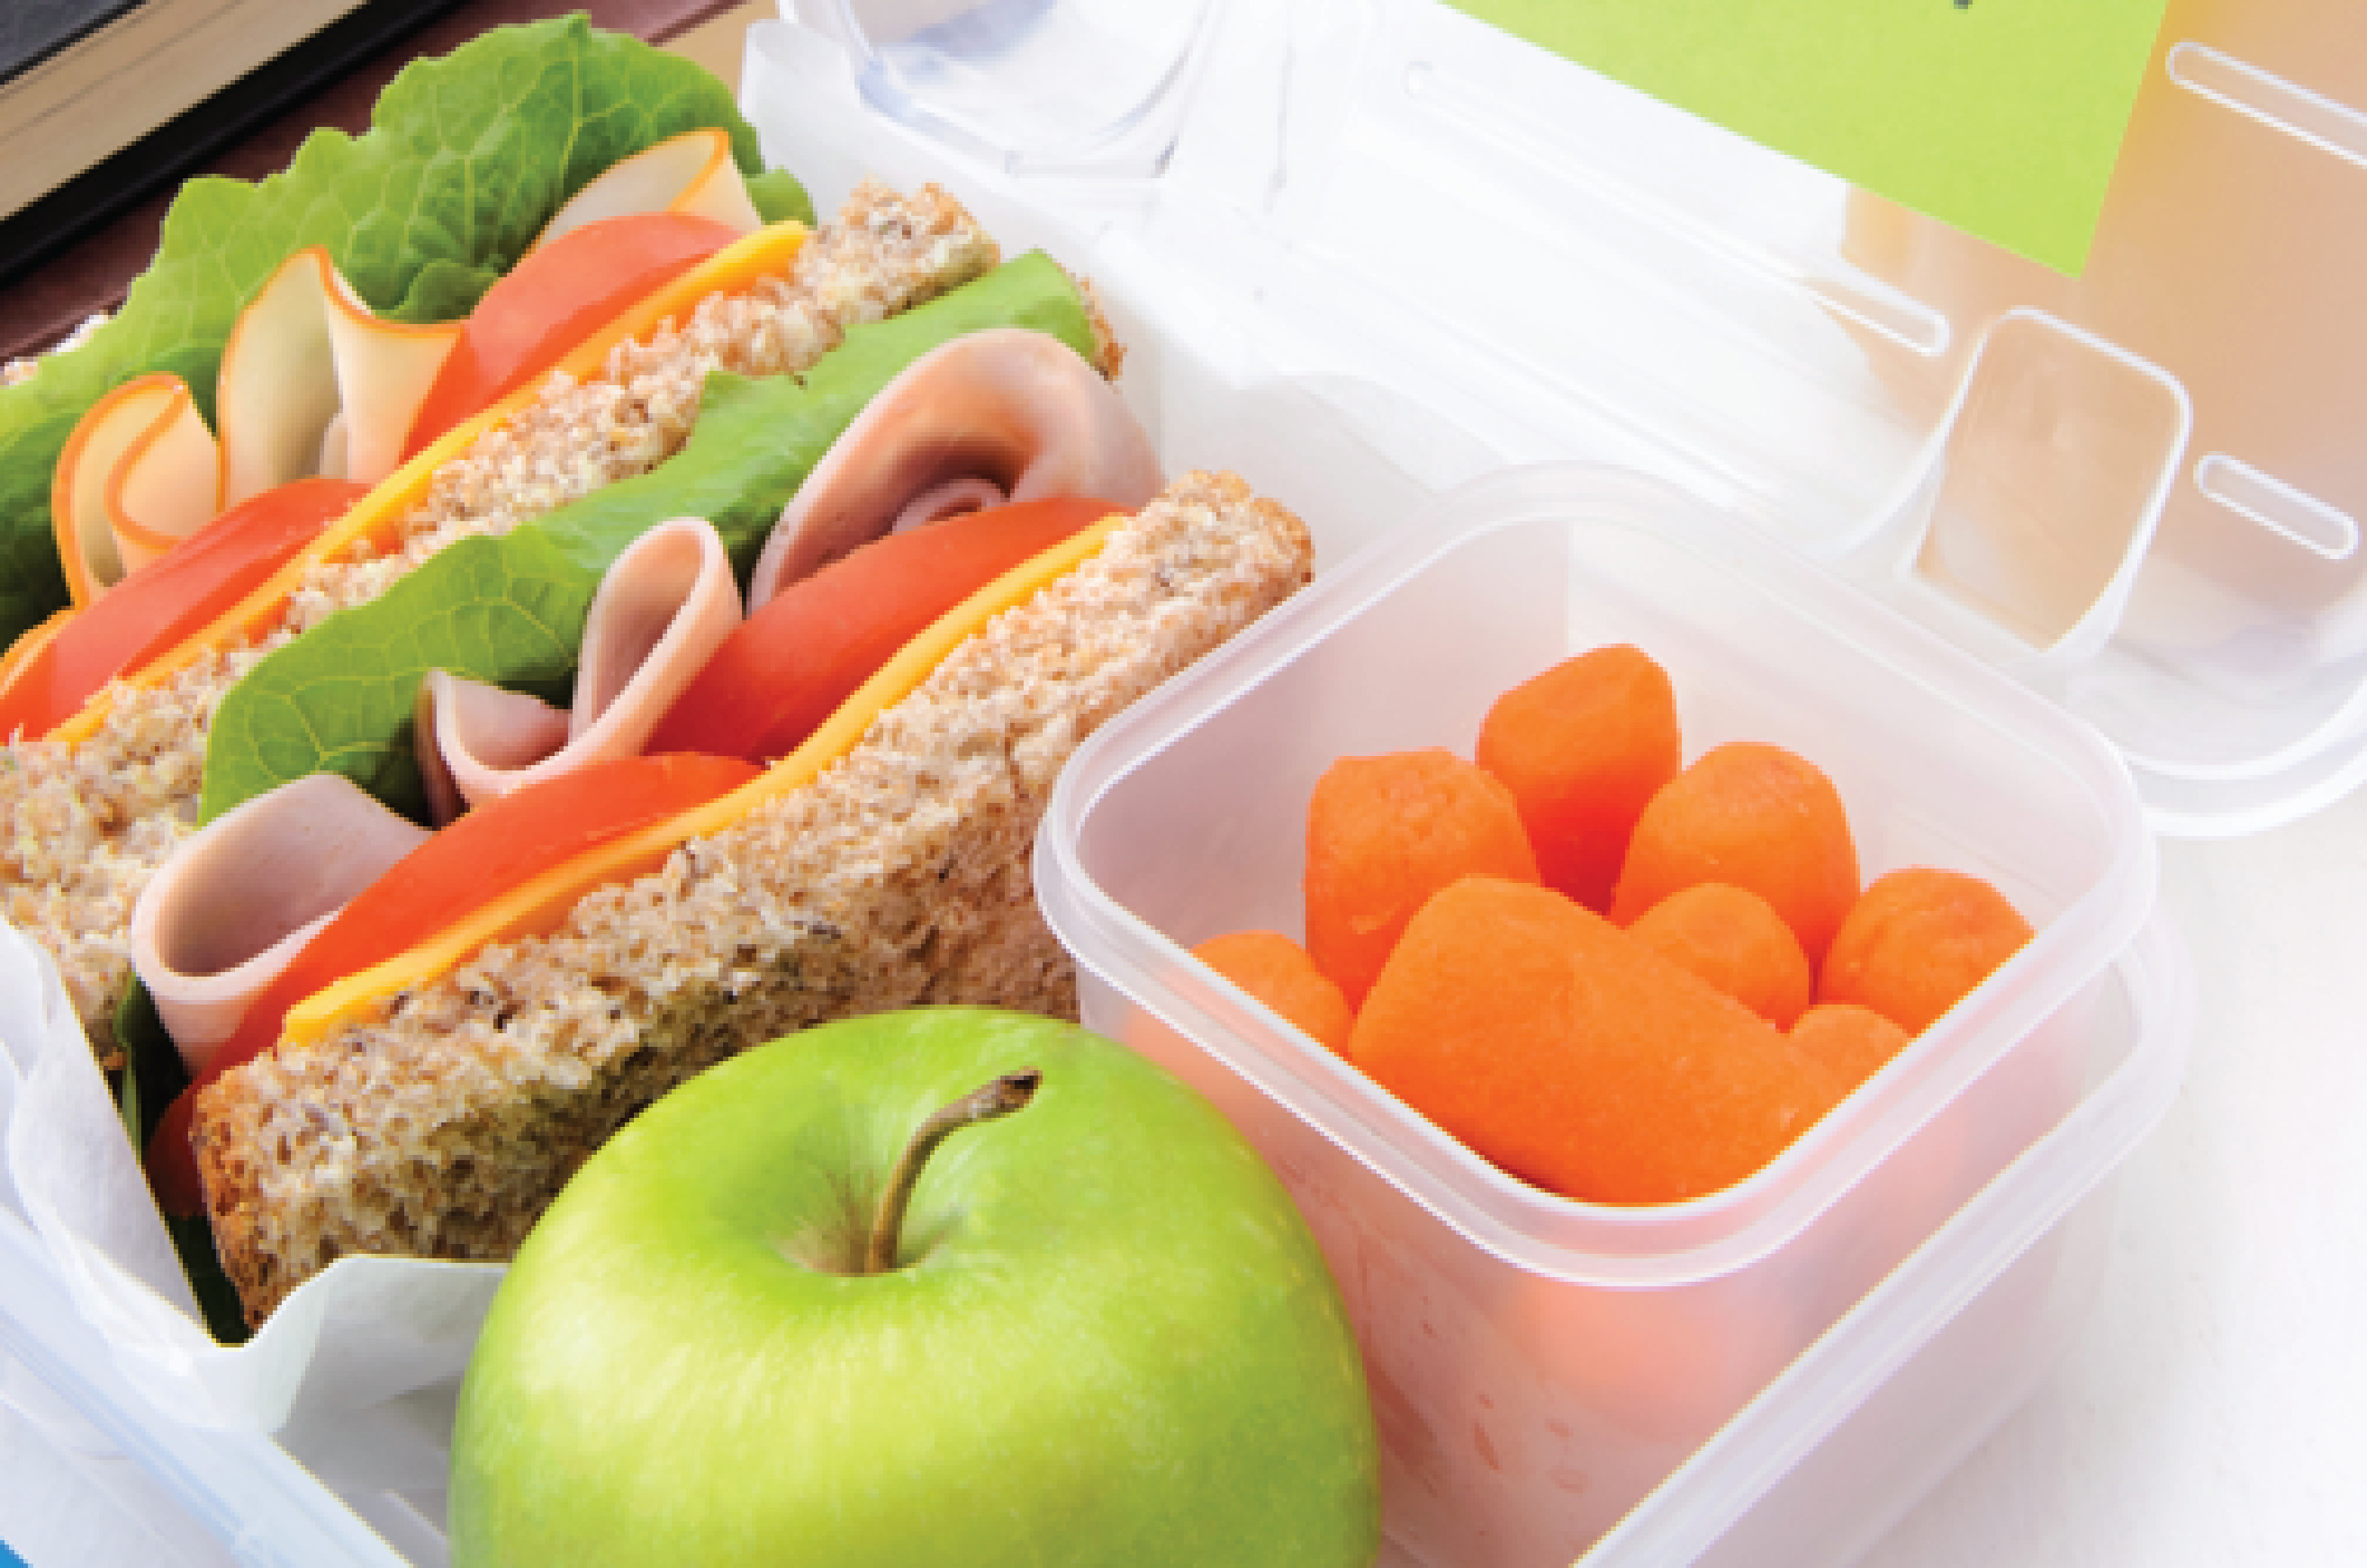 Pack Healthy School Lunches
 Pack Earth Friendly School Lunches